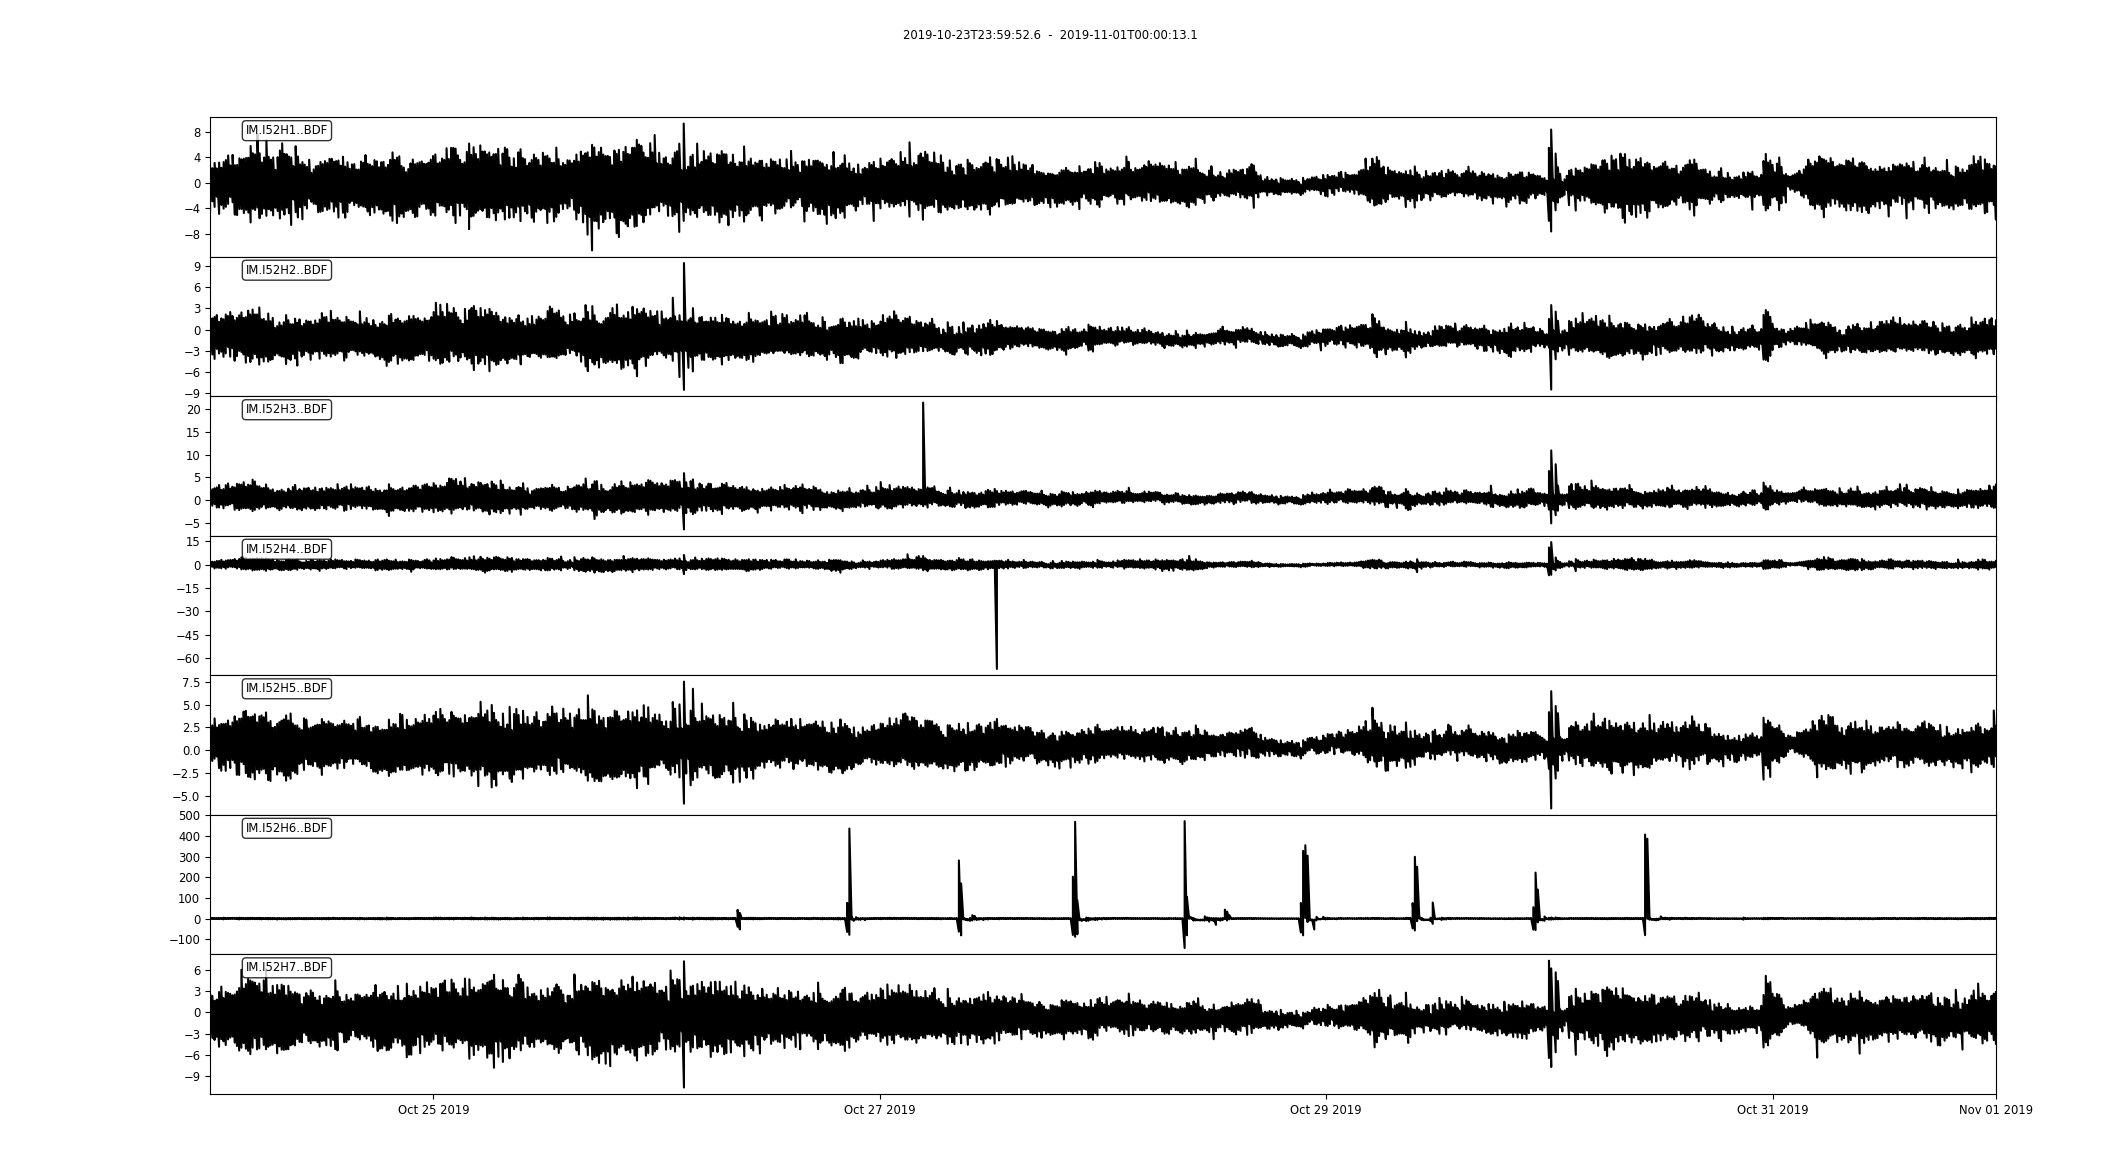 Data from all 7 array elements at IS52. The spikes at H6 correlate with the twice-daily high tide, and likely indicate when the site was flooded. The waveforms shown here were recorded 1 month after the maintenance visit, which tells us that the flooding issue is ongoing. 